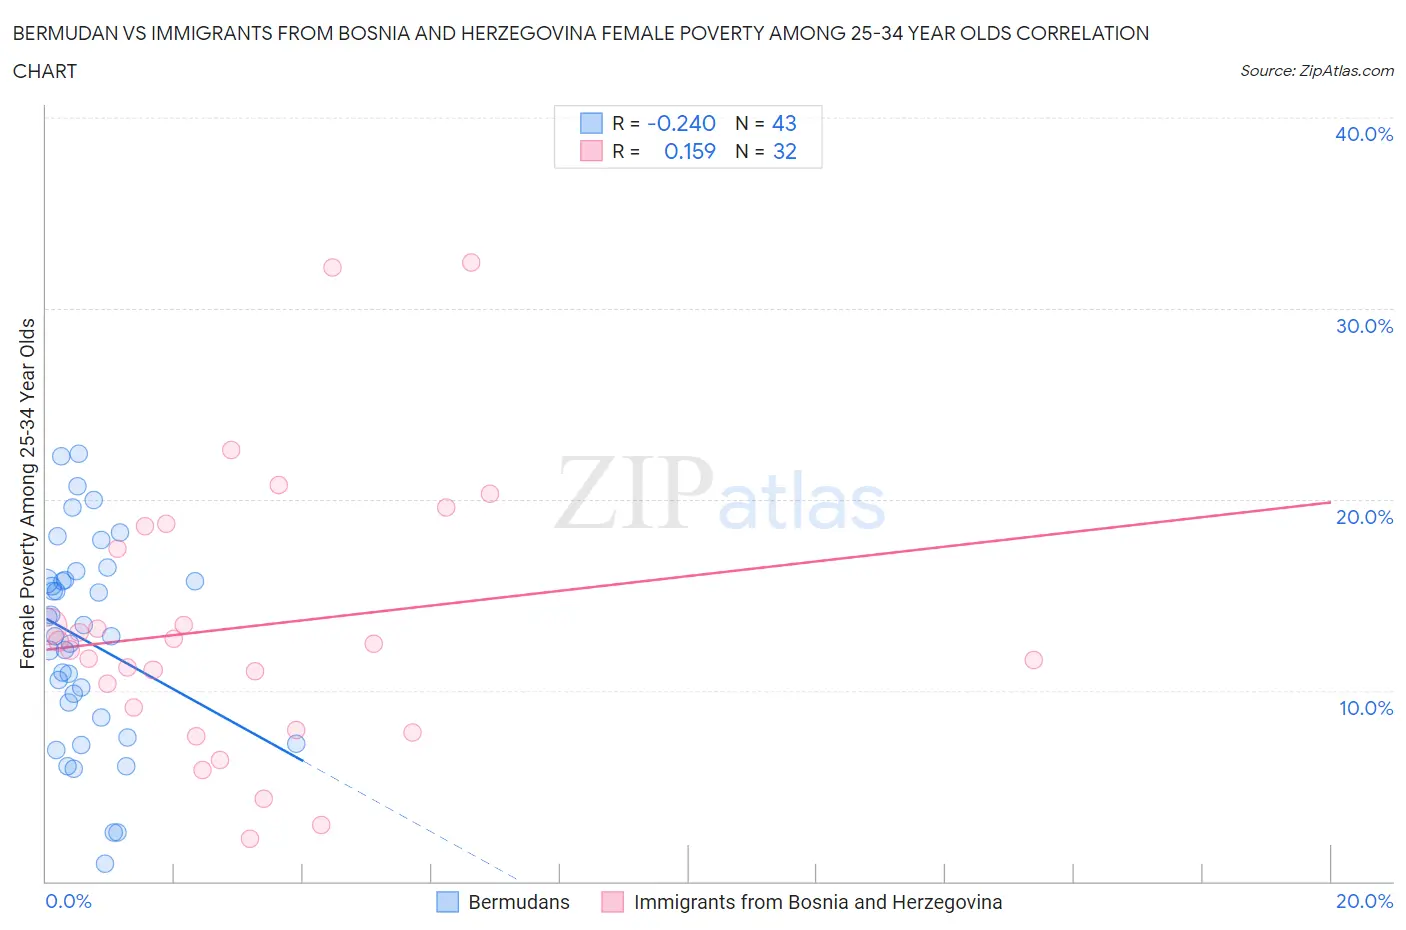 Bermudan vs Immigrants from Bosnia and Herzegovina Female Poverty Among 25-34 Year Olds